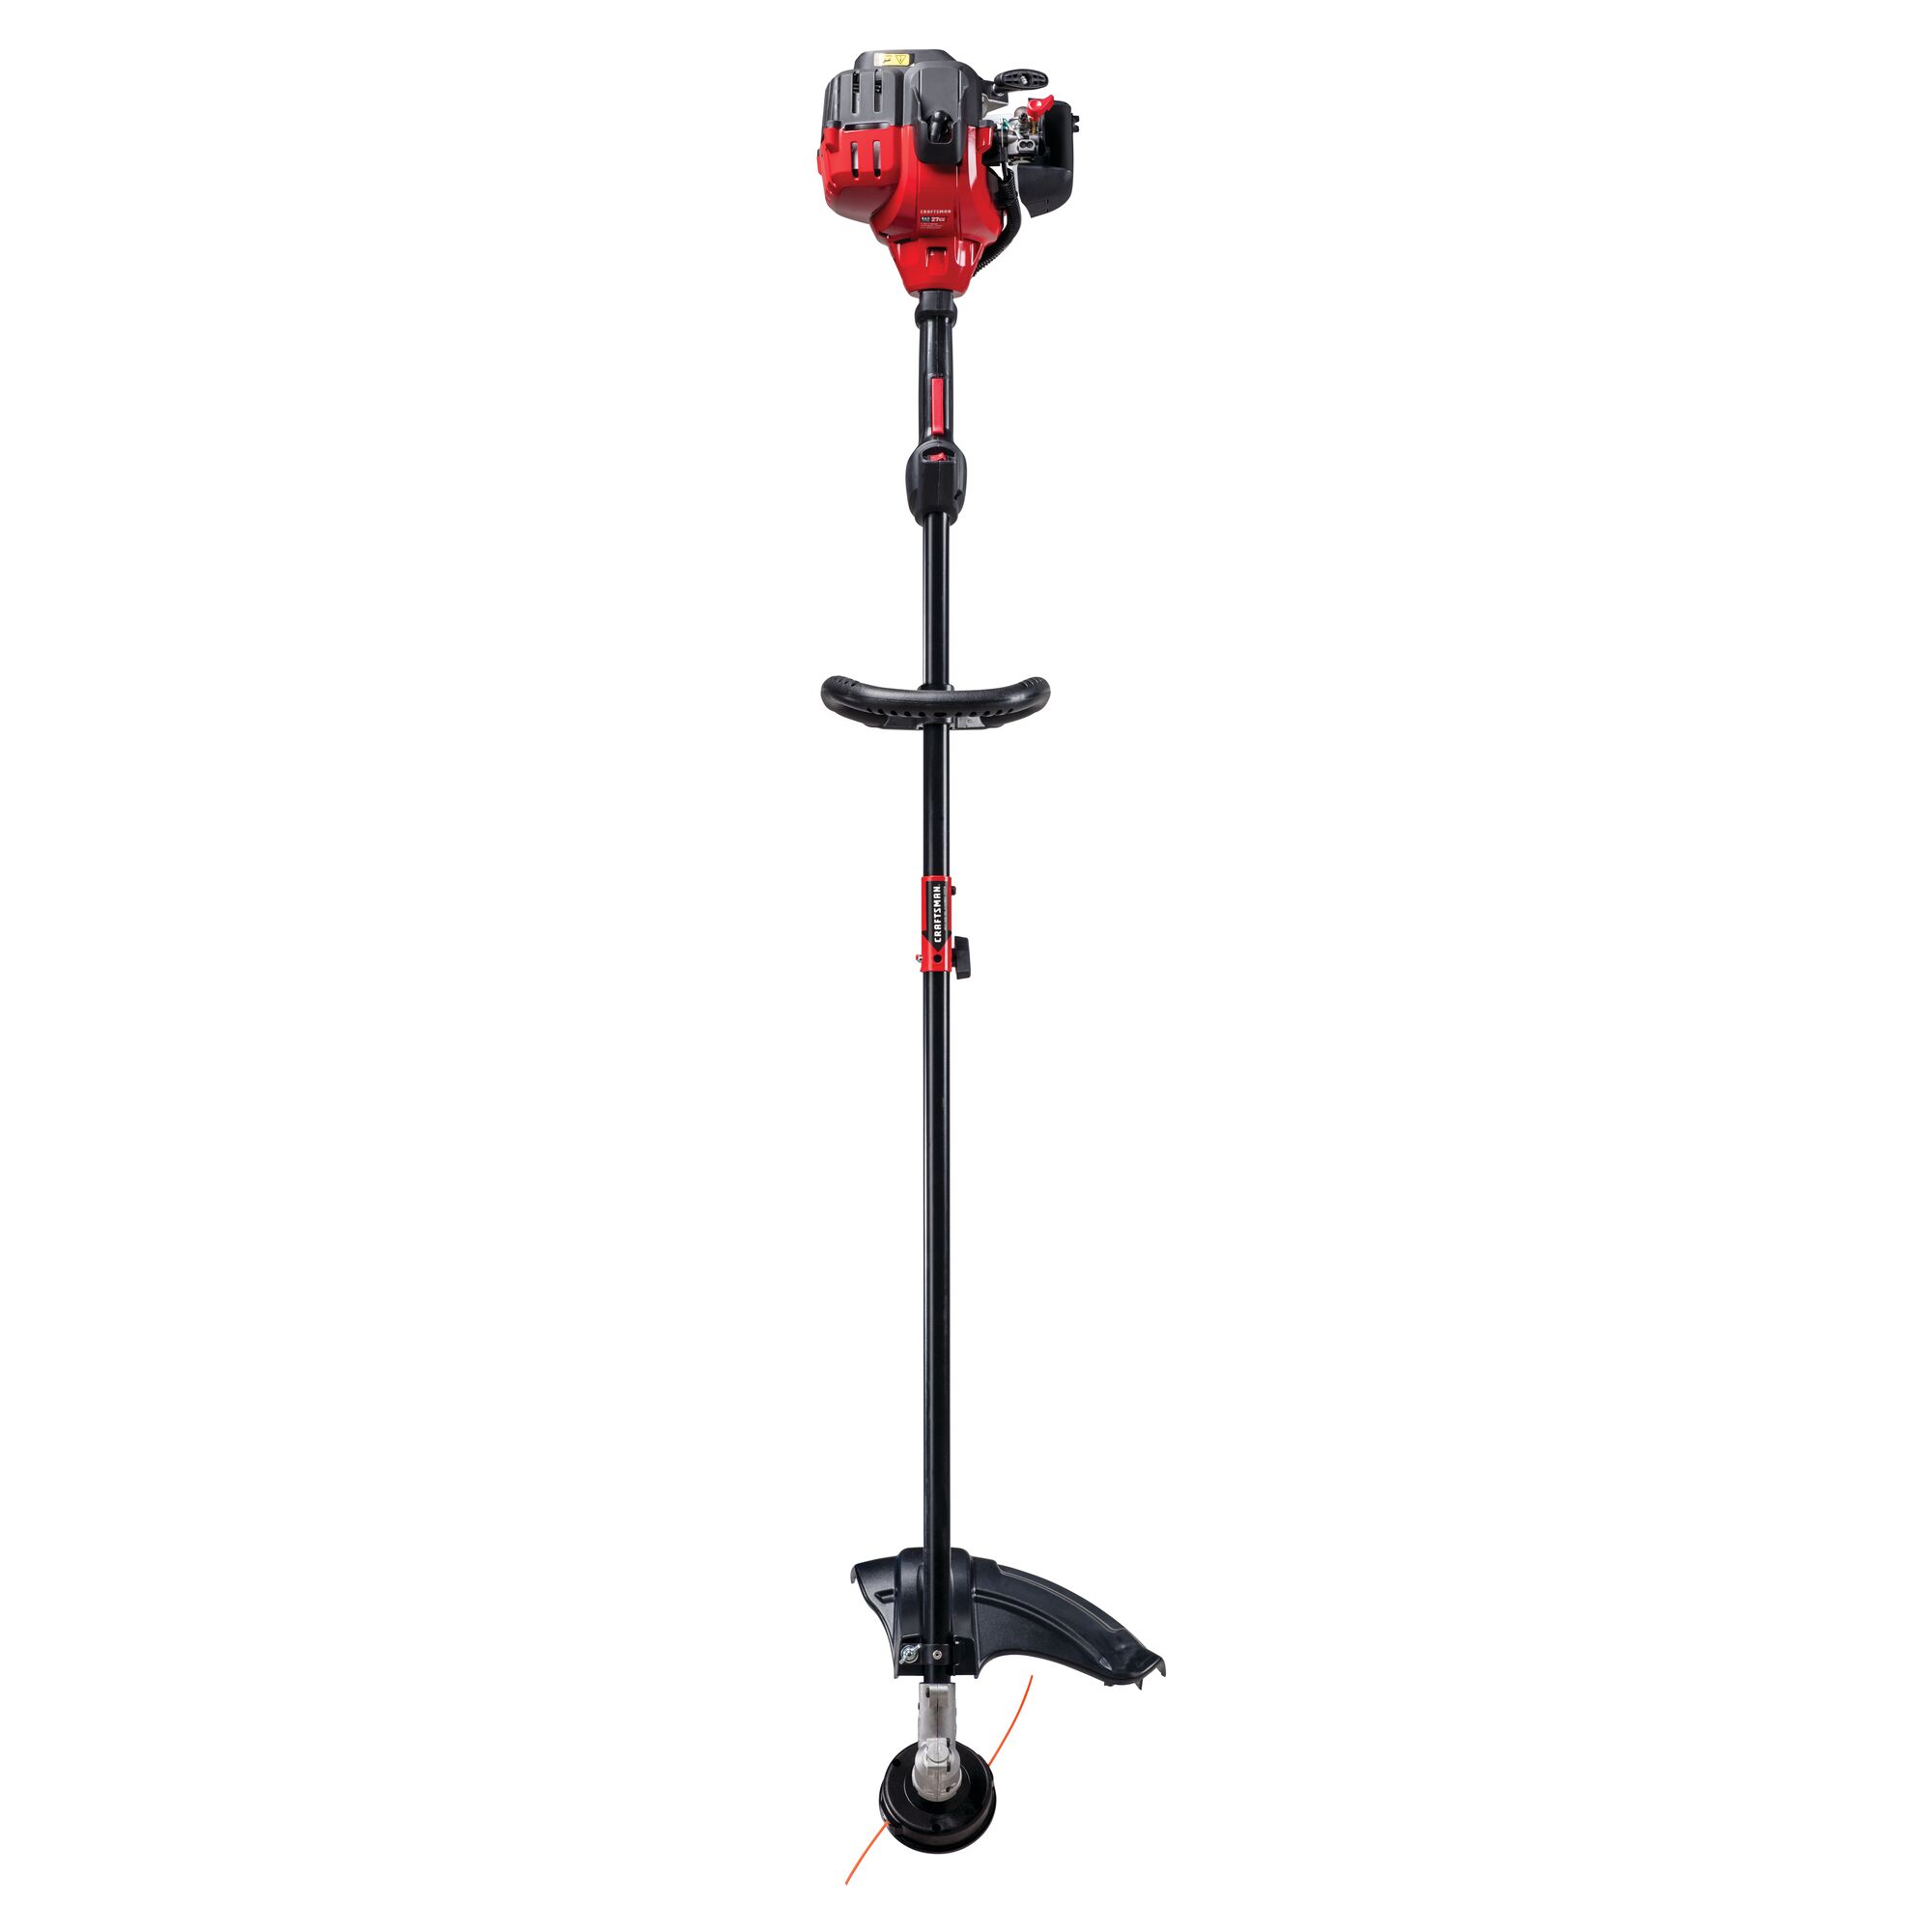 17 inch 2 Cycle straight shaft gas weedwacker string trimmer with attachment capability.